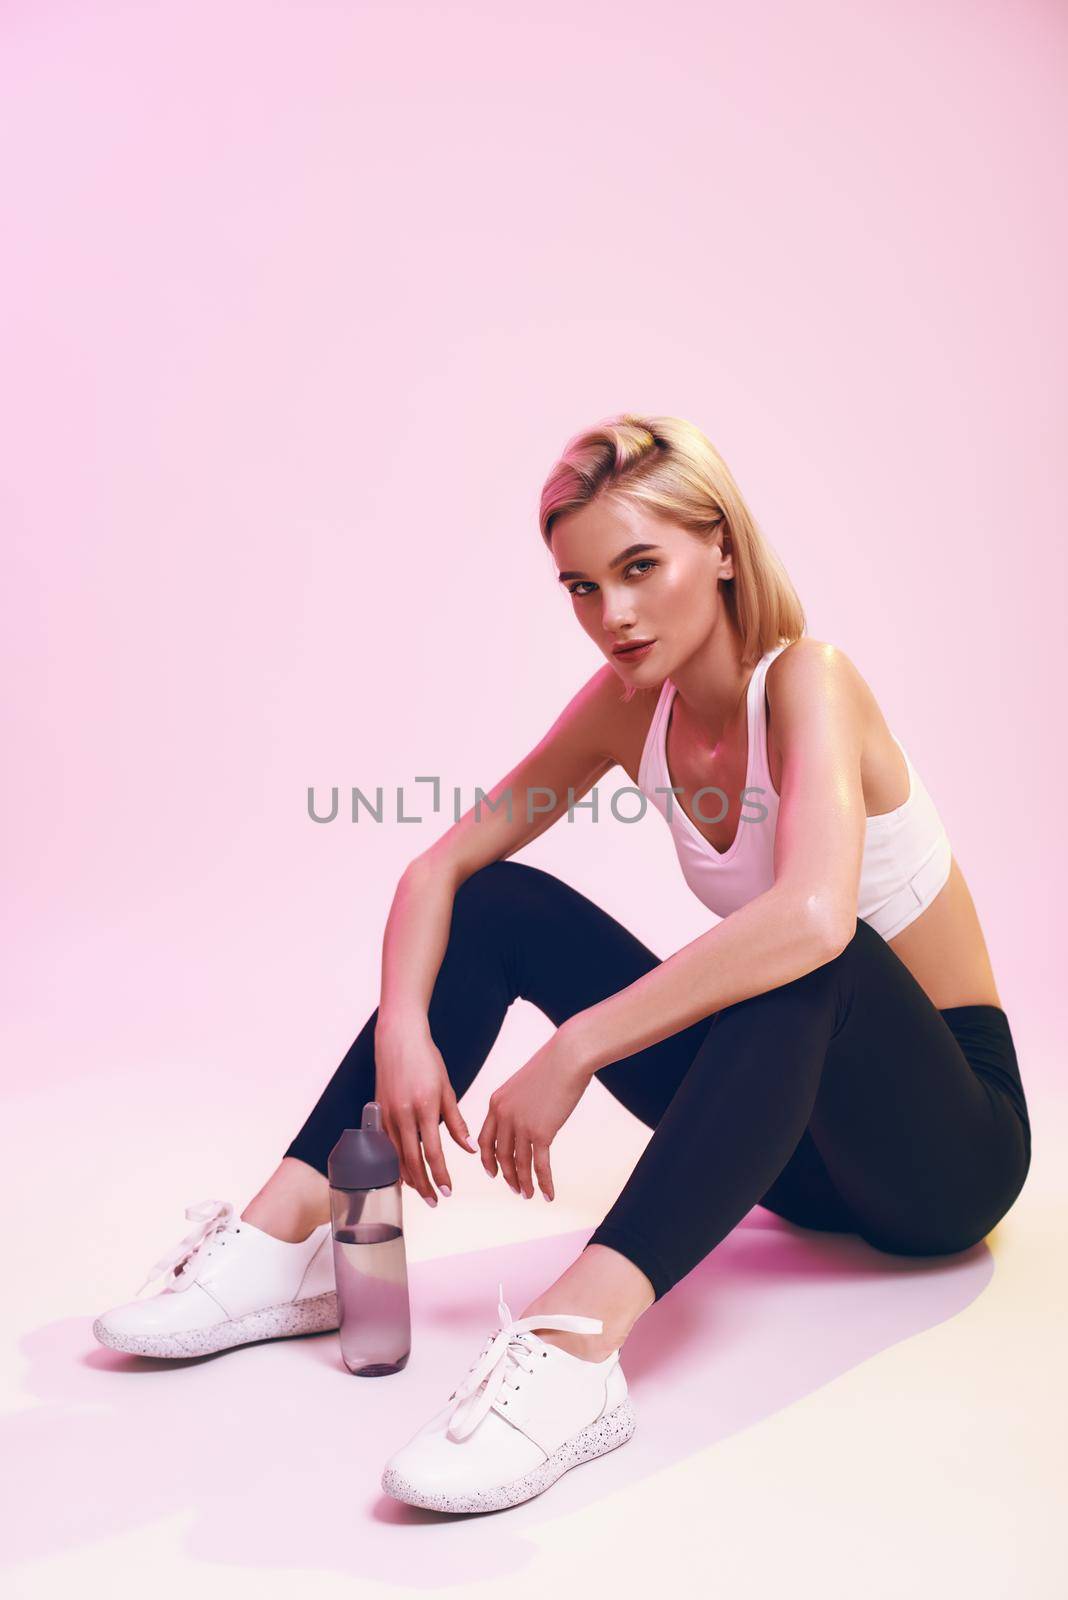 After workout. Cute and young sporty woman in sports clothing relaxing and looking at camera while sitting on the floor against pink background in studio by friendsstock